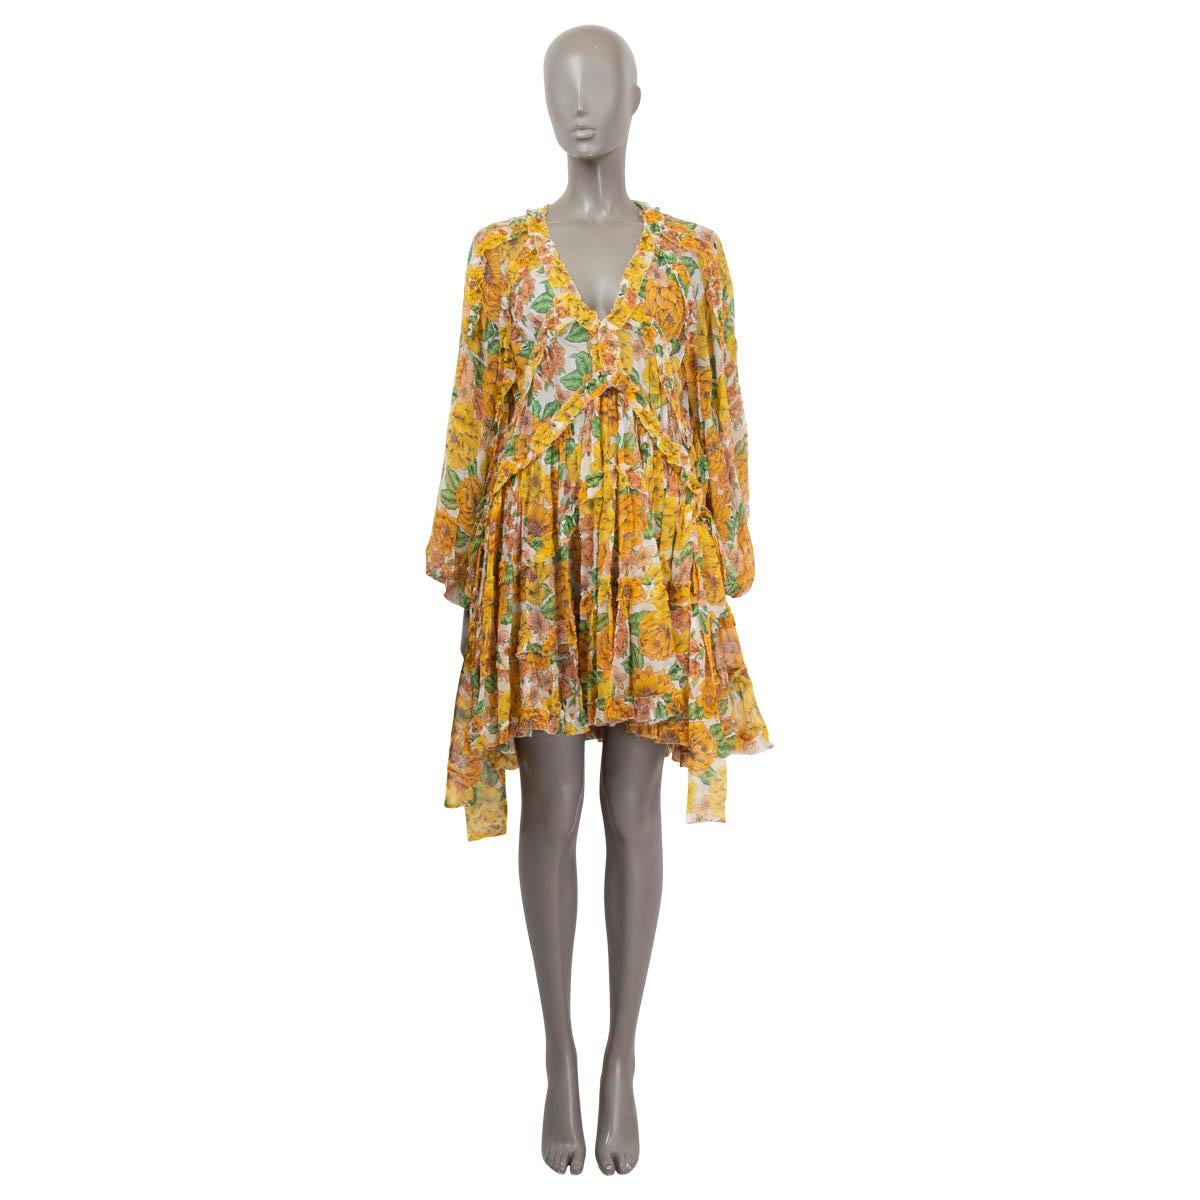 100% authentic Zimmermann floral poppy chiffon dress in yellow, orange and green silk (100%) with a loose fit, flowy fabric, V-neckline, a detailed ruffled hemline, 3/4 sleeves and elastic sleeve cuffs. Comes with a slip-dress underneath with